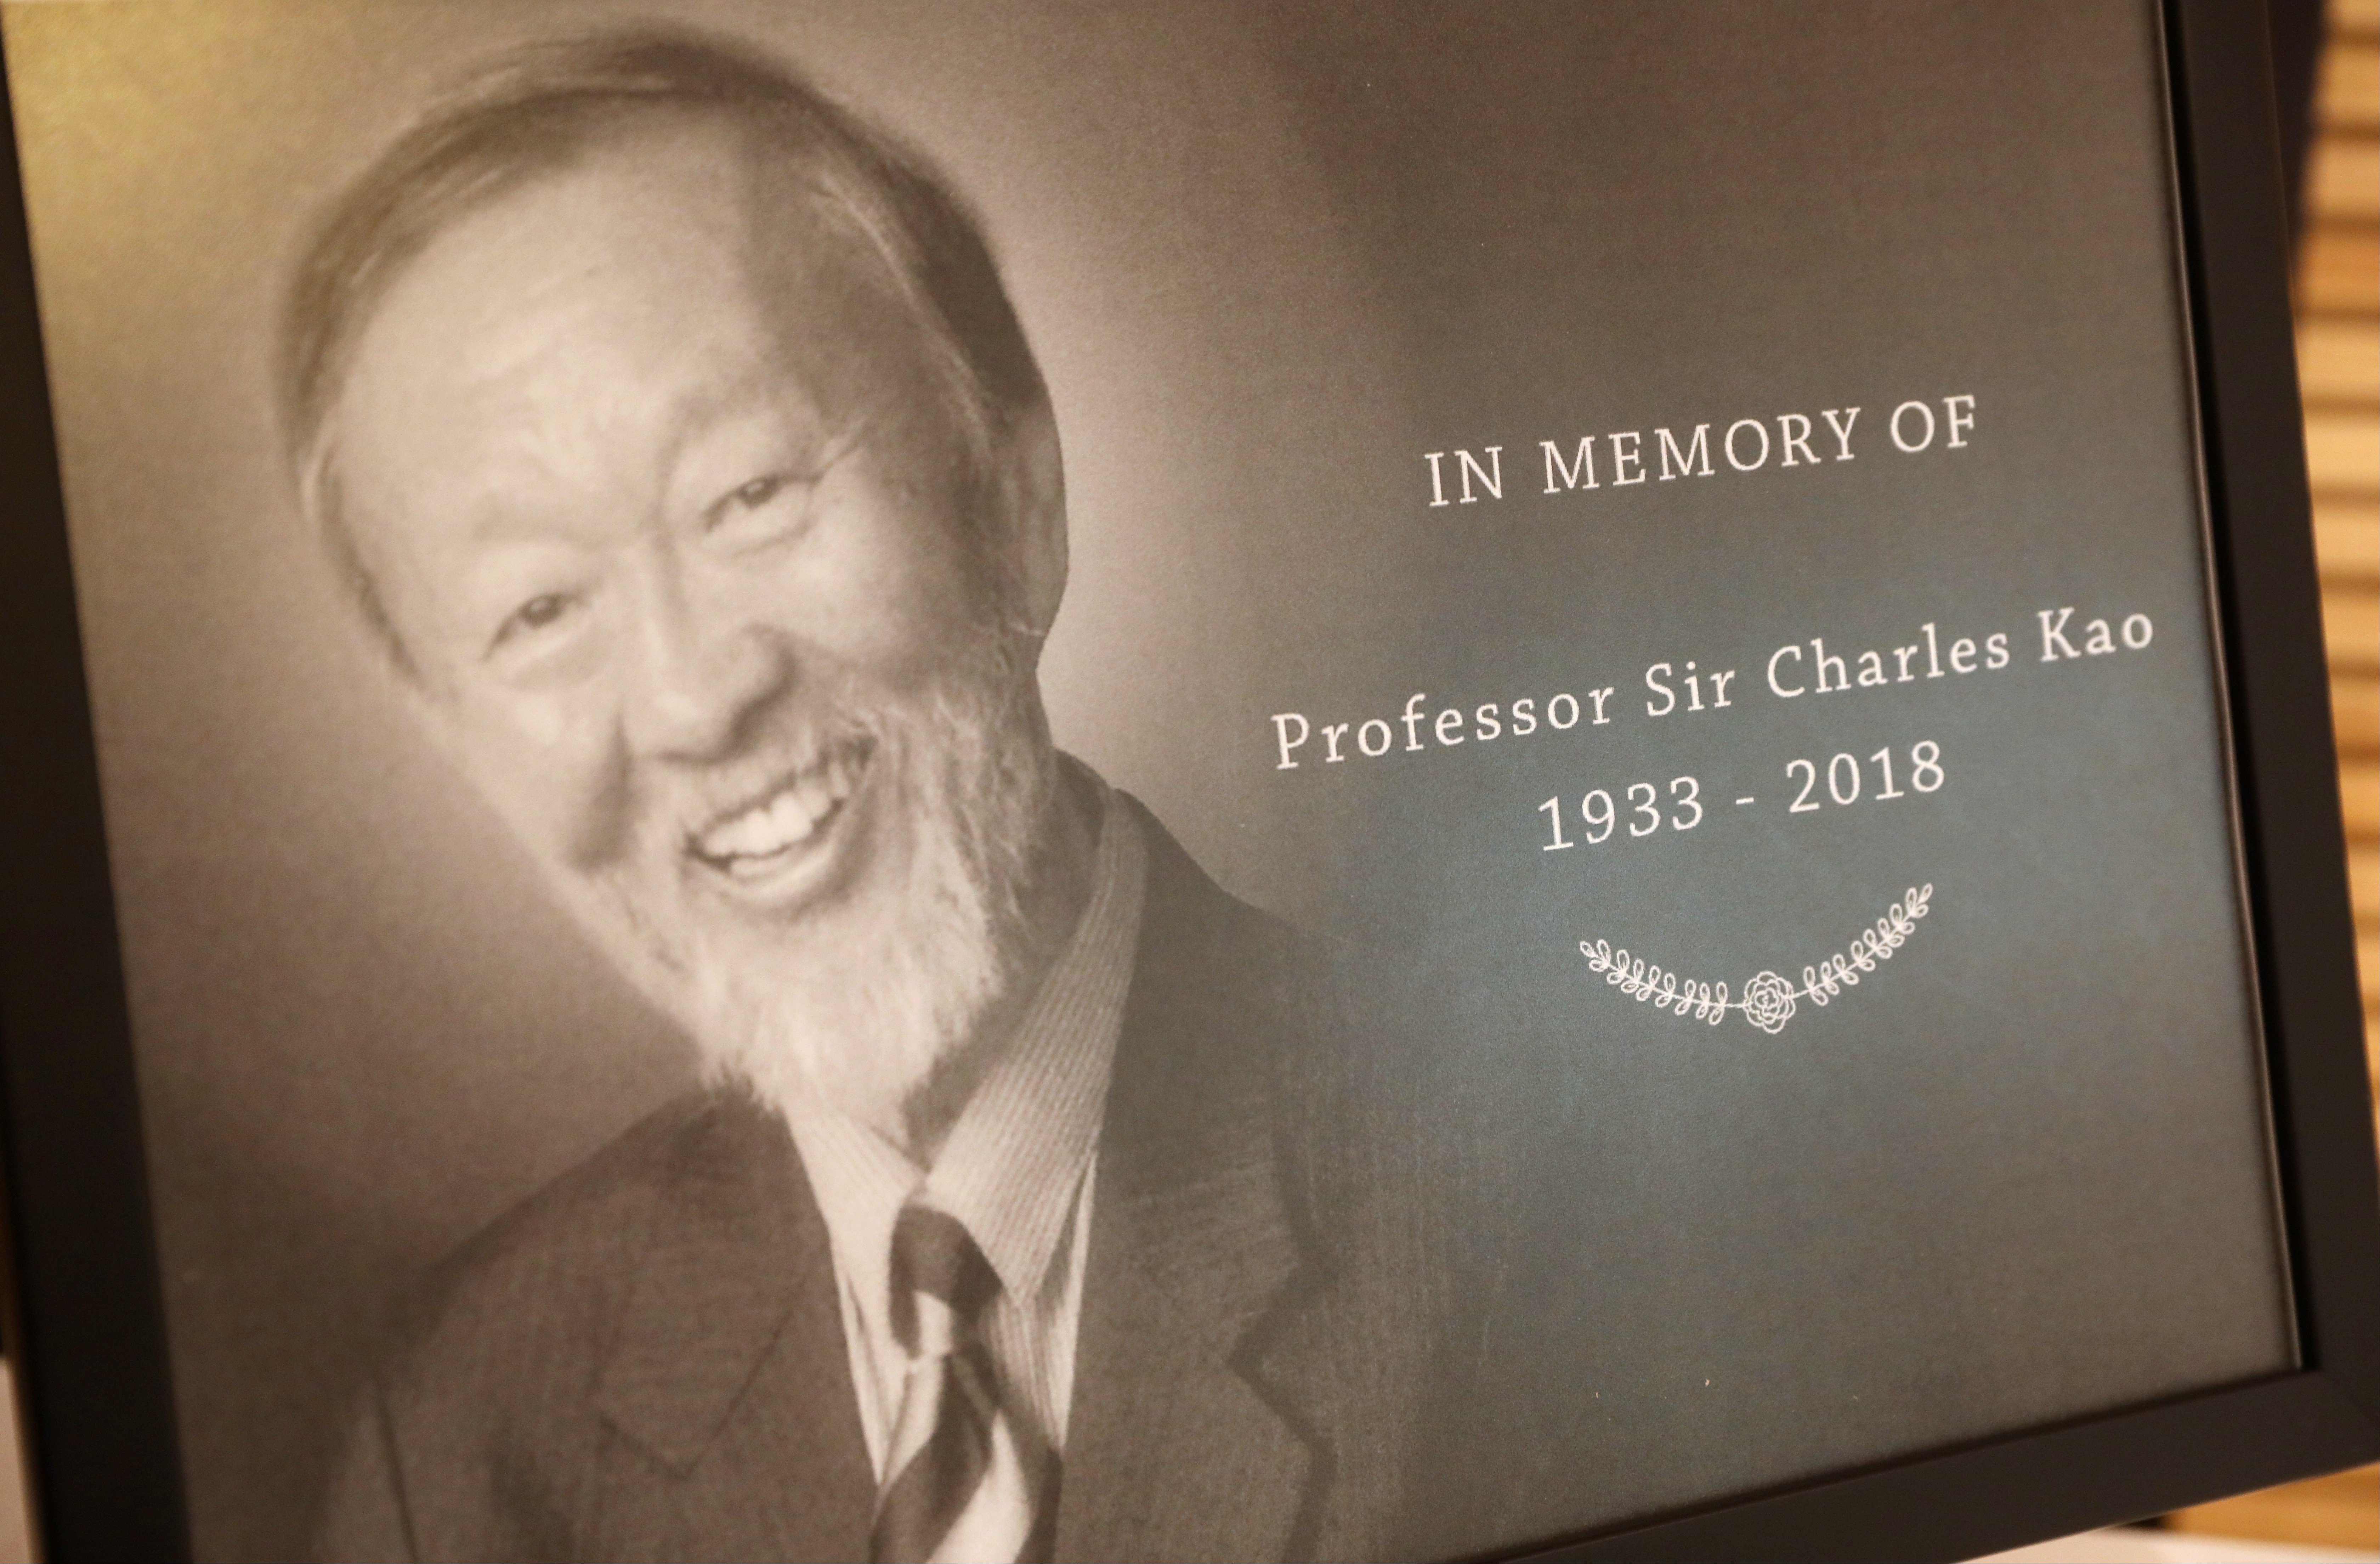 Professor Charles Kao’s presence enhanced Hong Kong’s credentials as a place for science and research. Photo: K. Y. Cheng